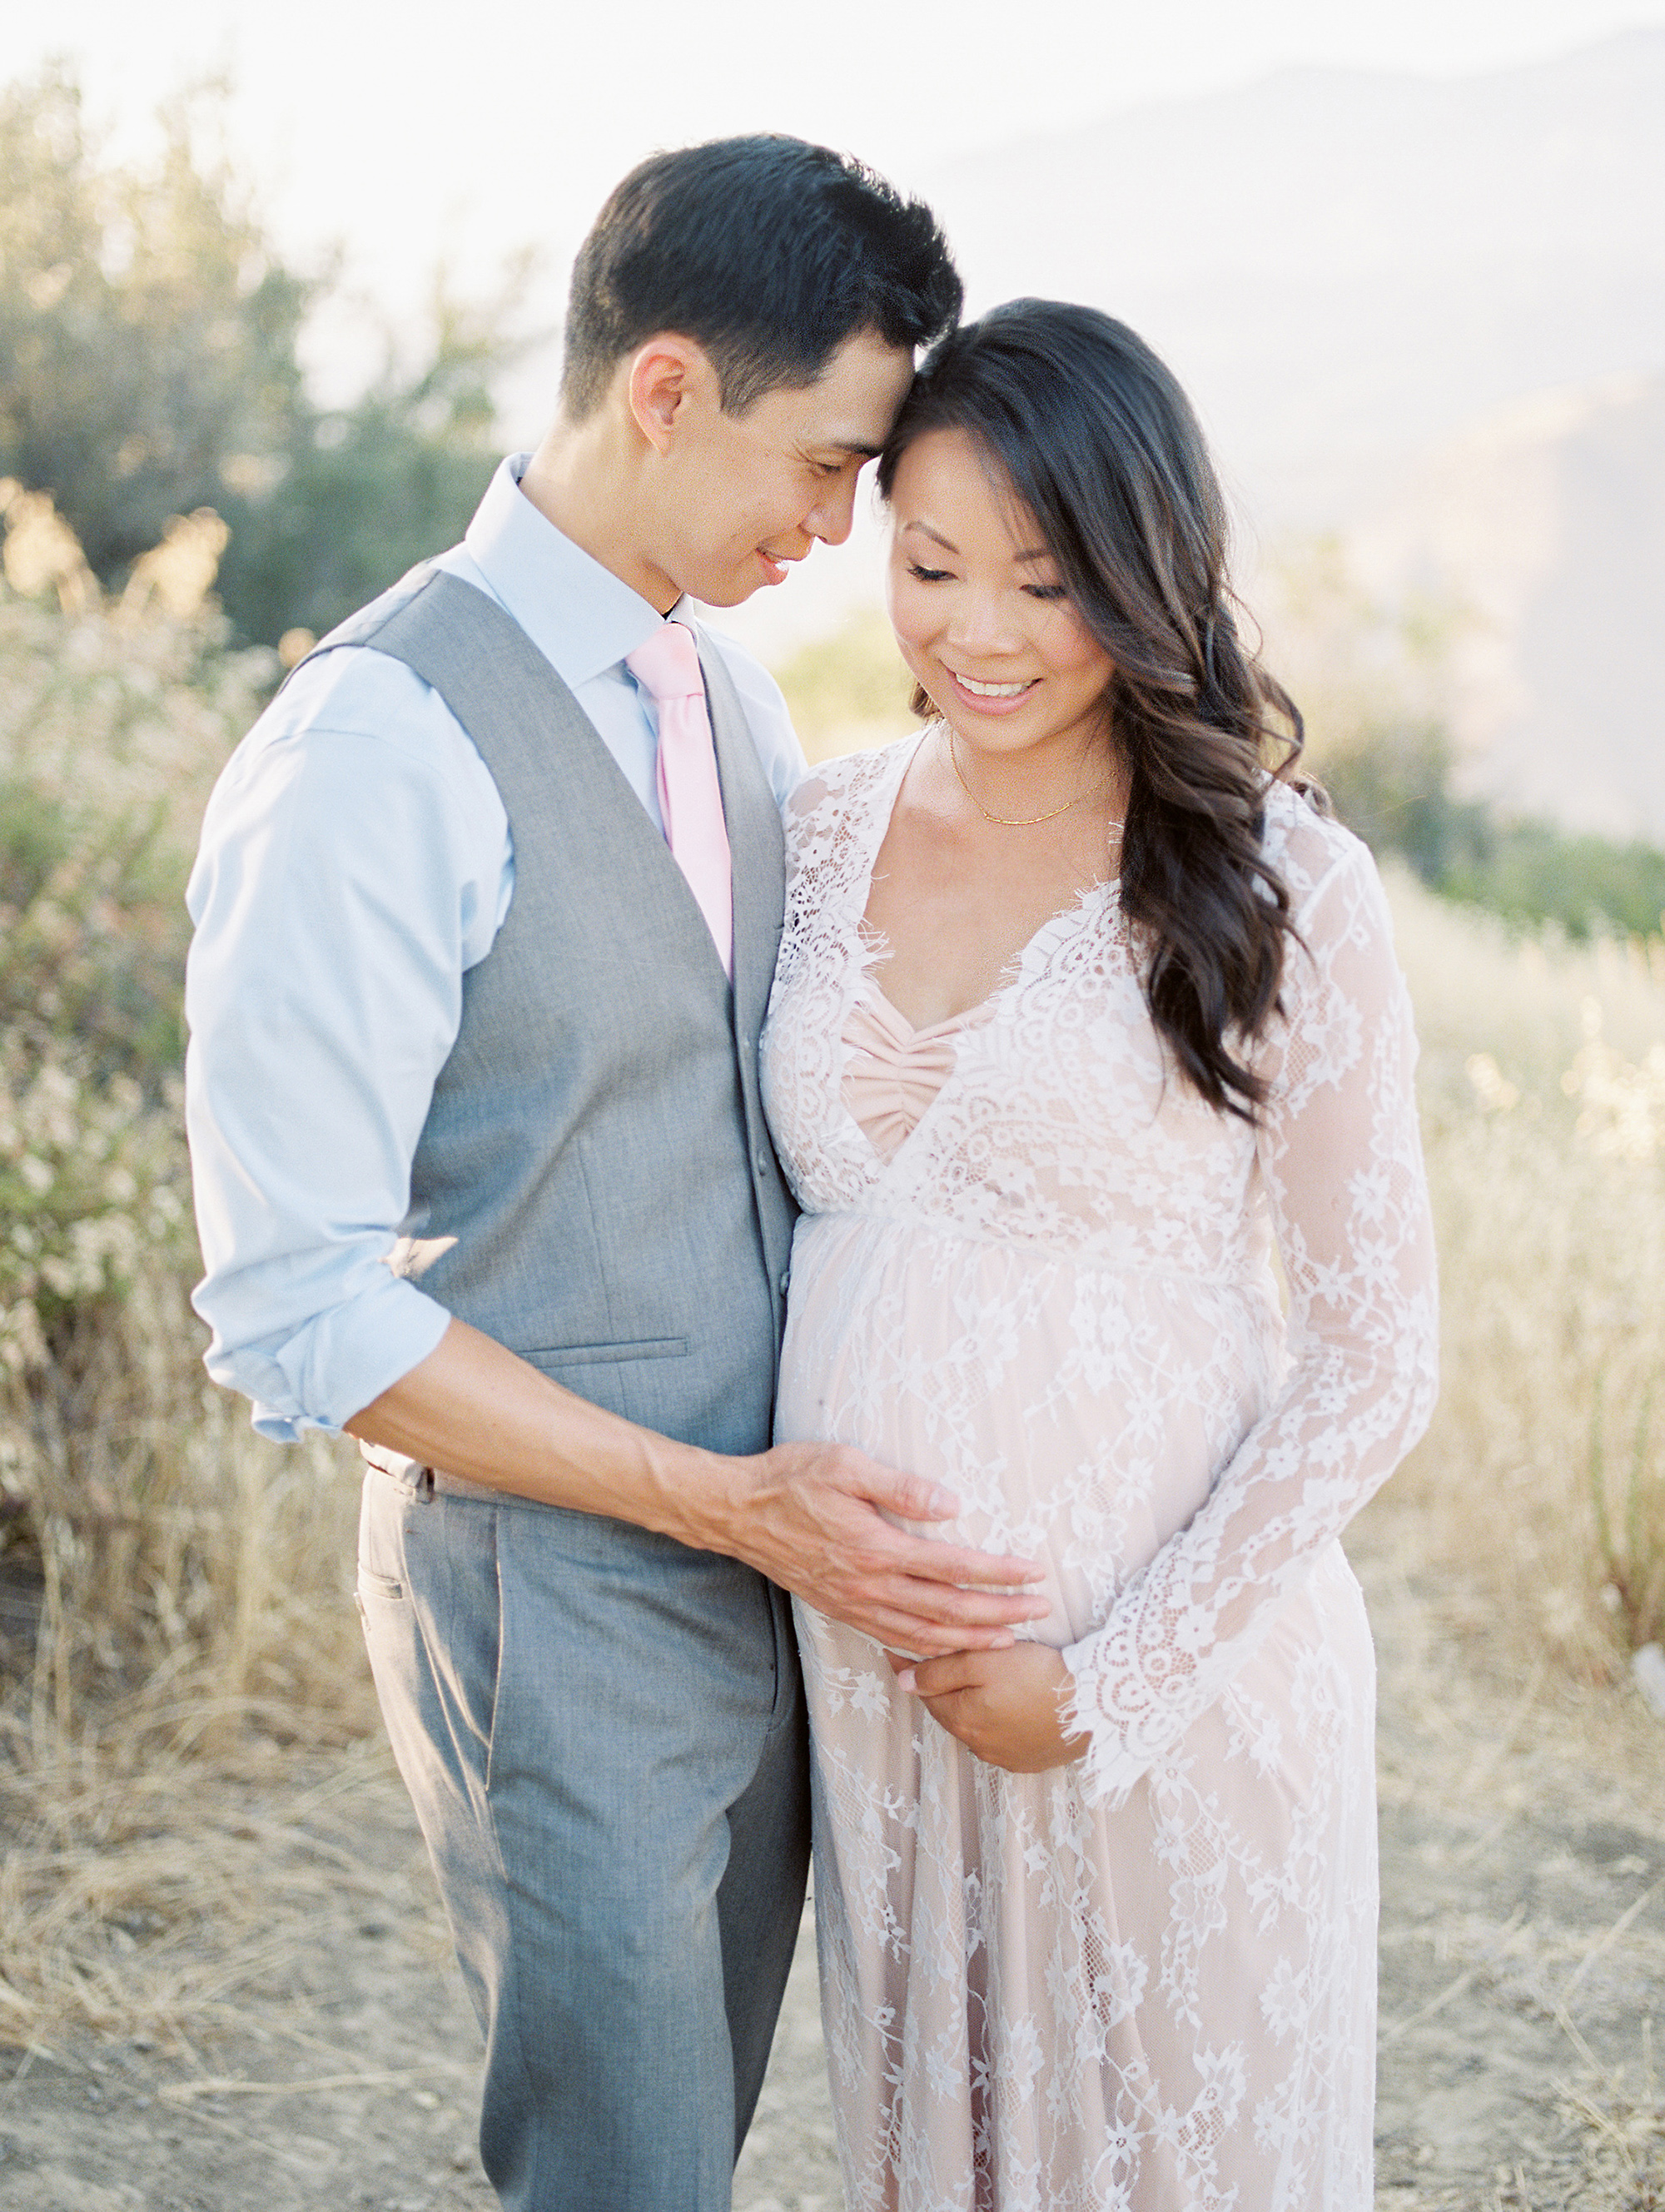 Dallas maternity photographer Tenth & Grace  specializes in pregnancy photography in Dallas and Fort Worth.